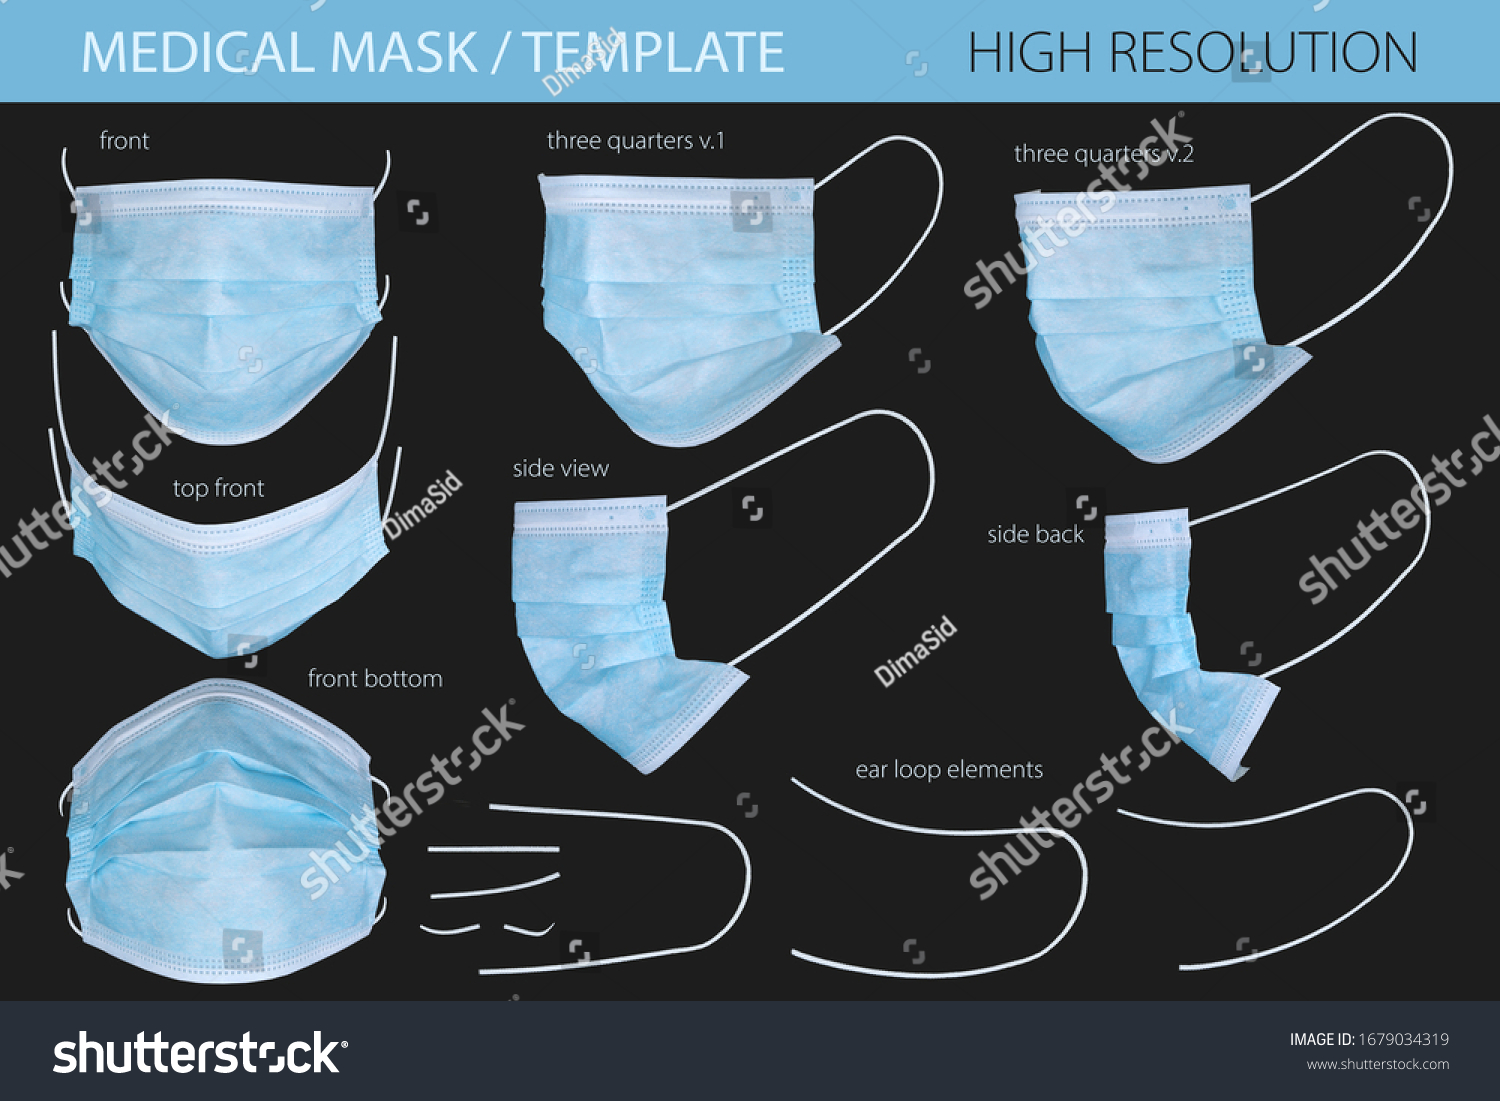 Medical mask isolated on black background, template. Medical mask whith clipping mask. Healthcare and medical concept. #1679034319